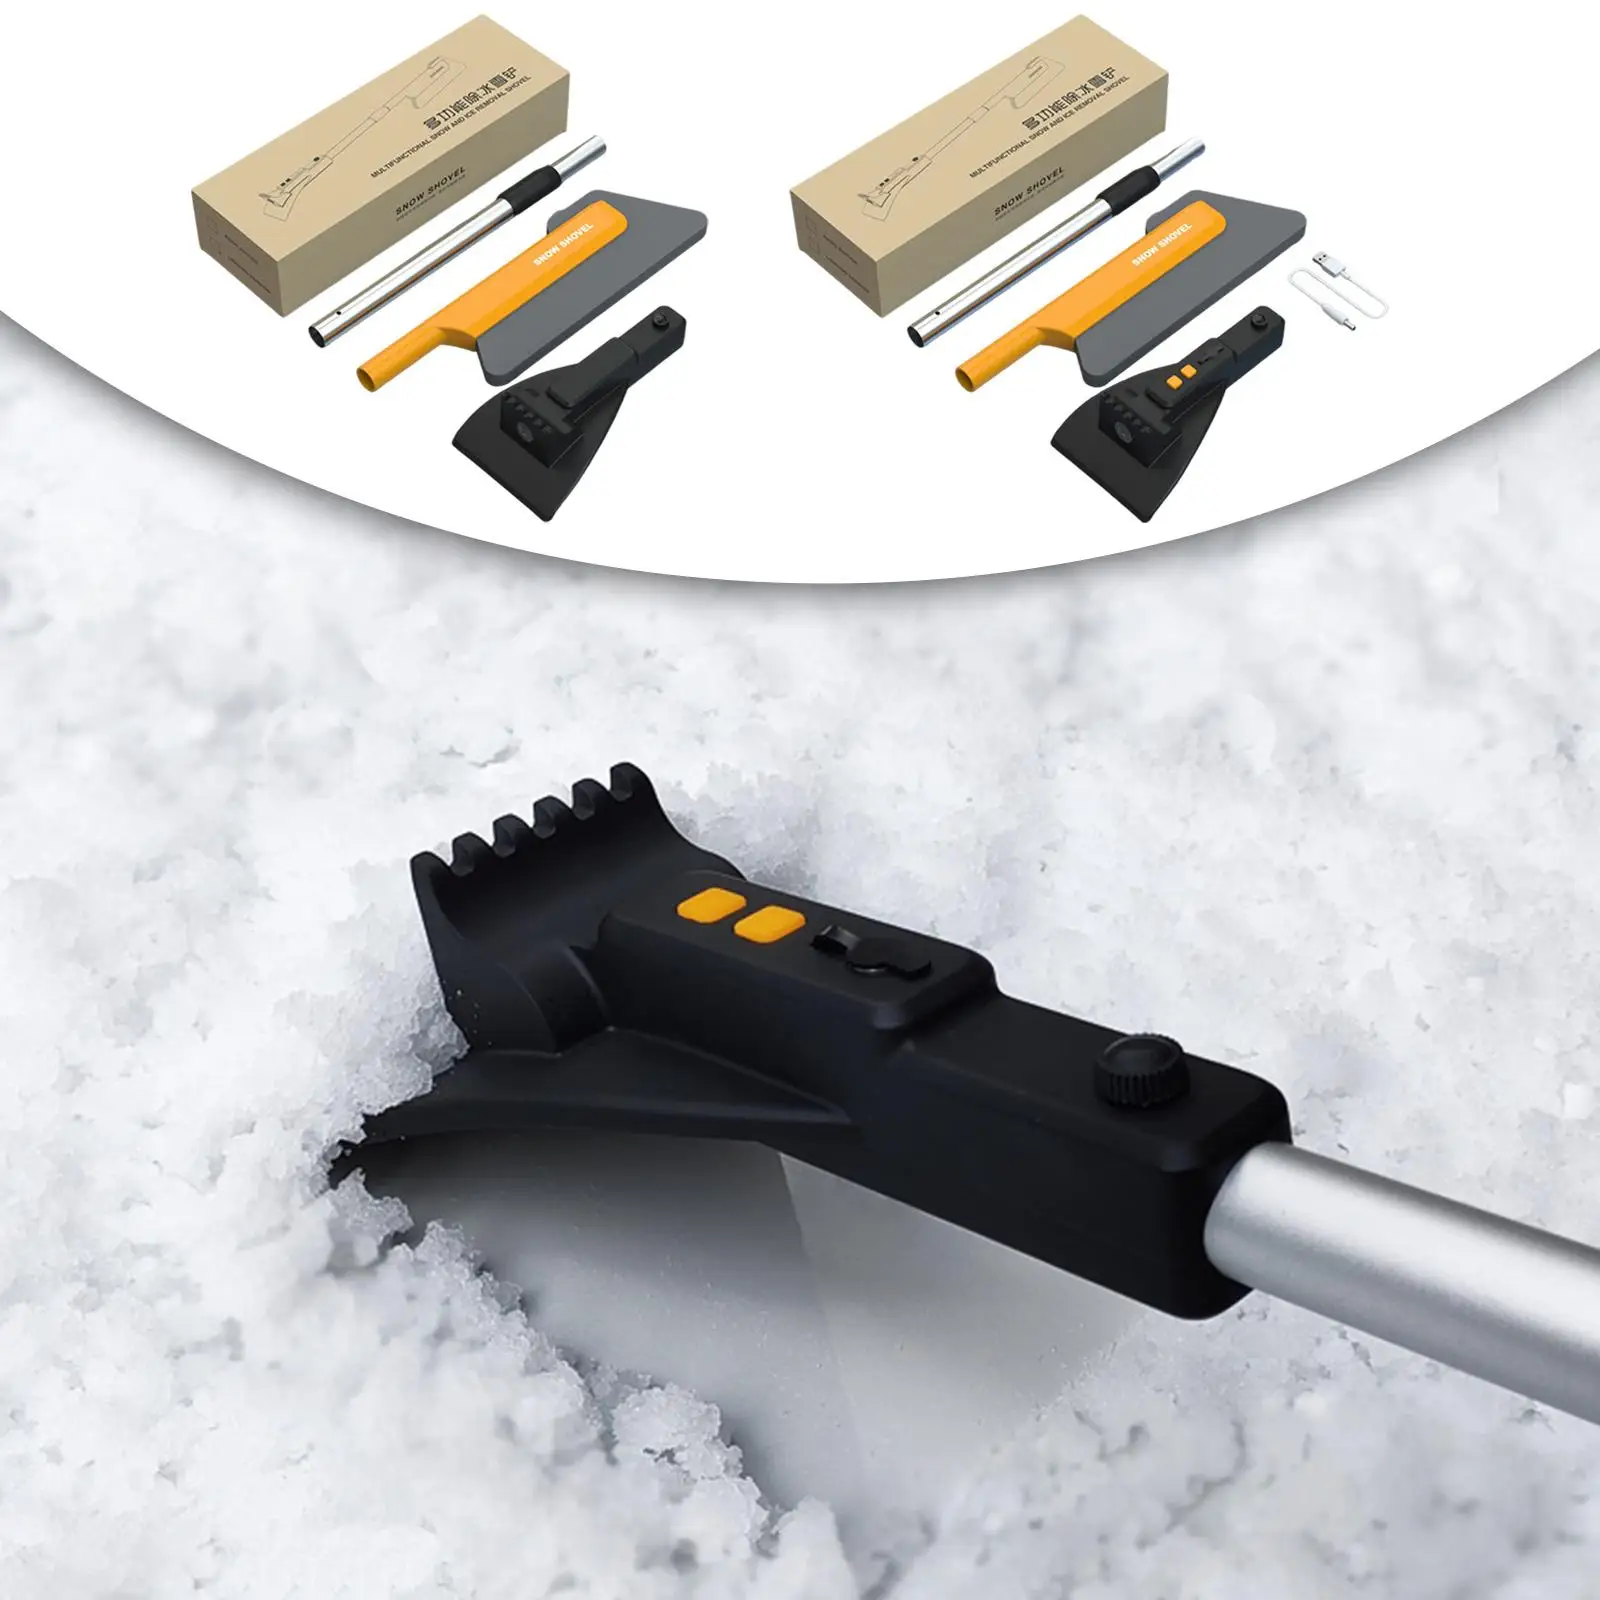 Portable 3 in 1 Car Ice Scraper Extendable Frost Multifunctional Snow EVA Brush for Windscreen Car SUV Window Clean Tools